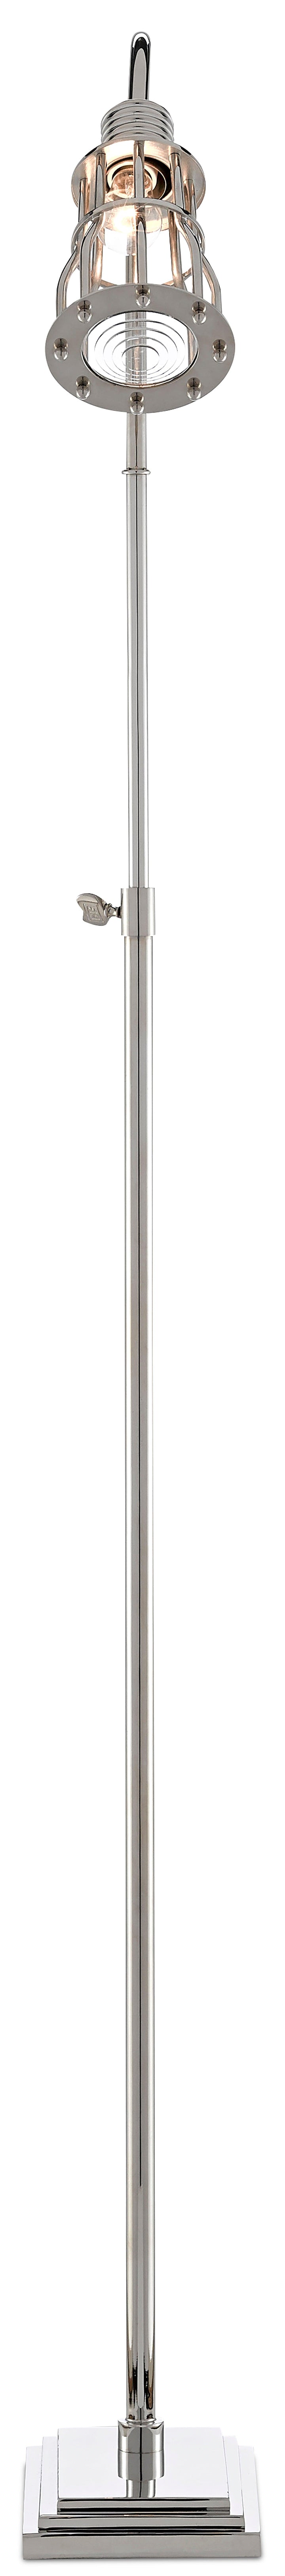 Davy Articulated Floor Lamp - Casey & Company